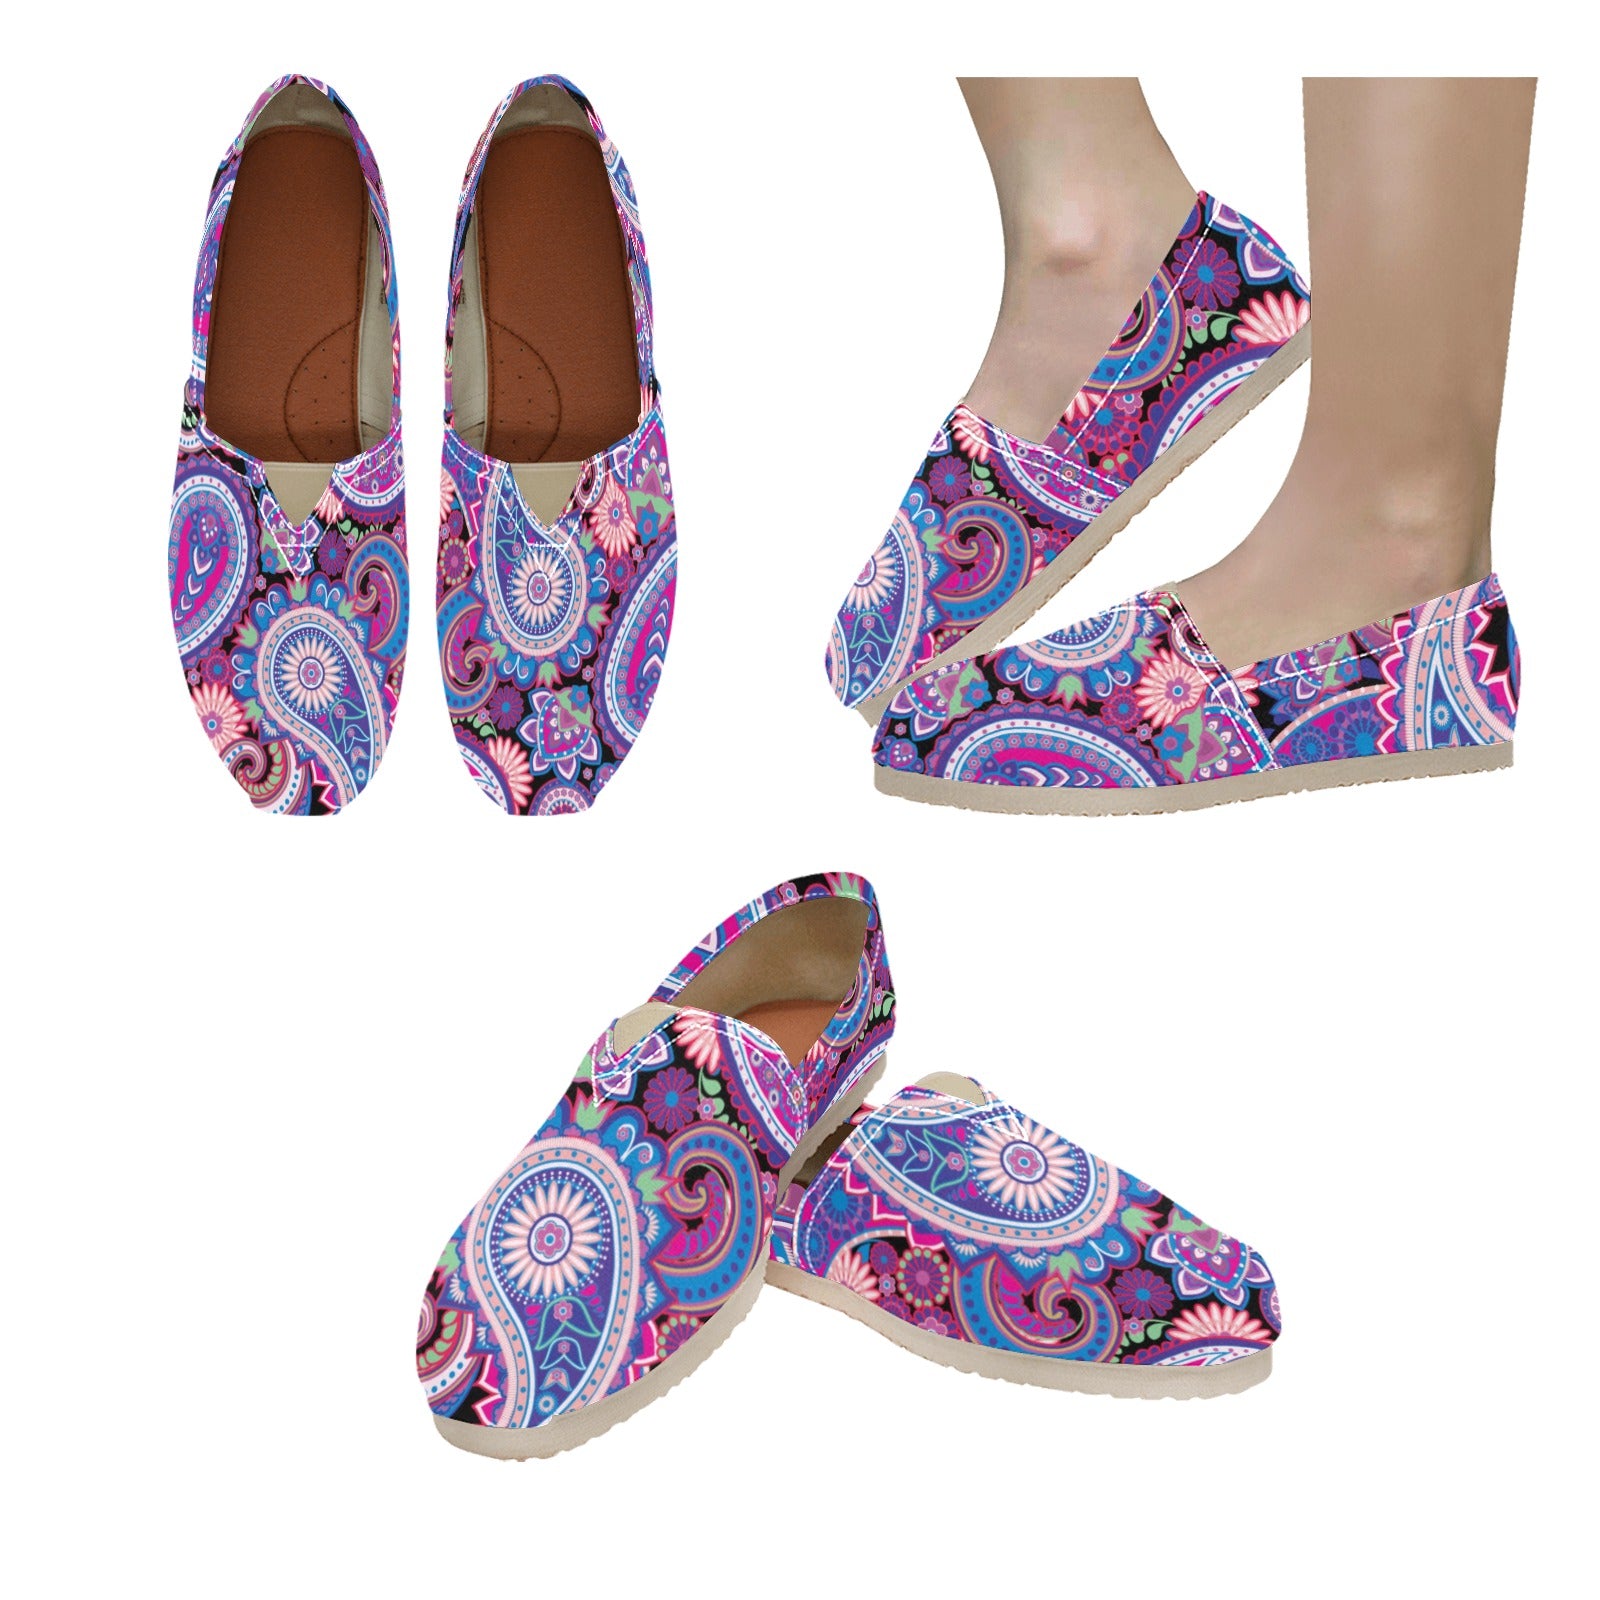 Purple Paisley - Casual Canvas Slip-on Shoes